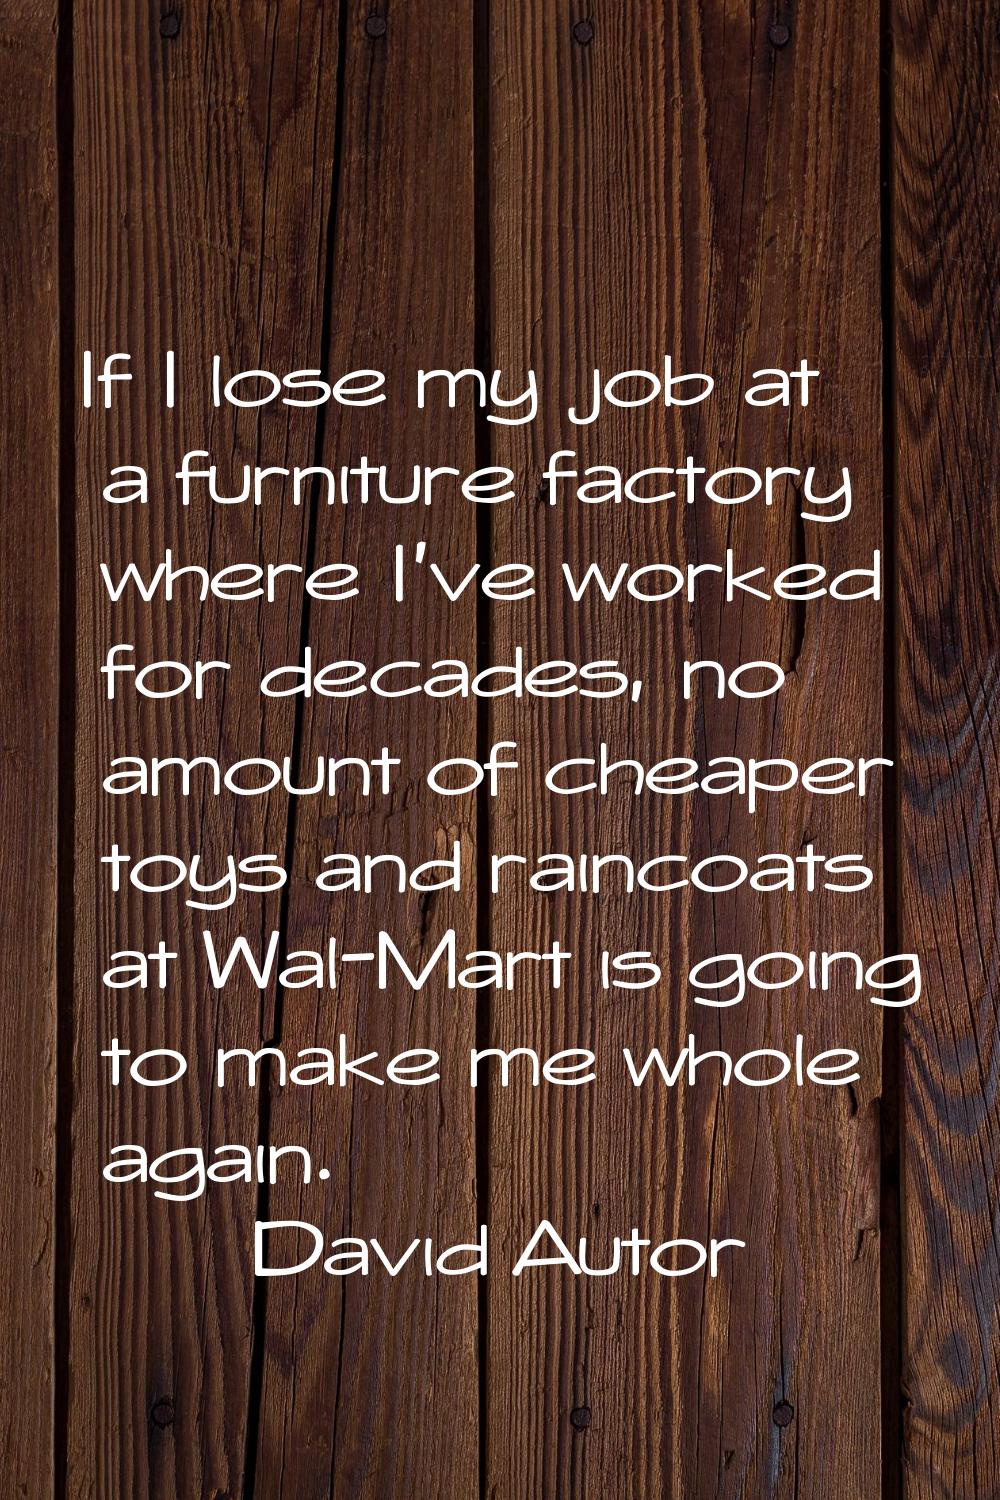 If I lose my job at a furniture factory where I've worked for decades, no amount of cheaper toys an